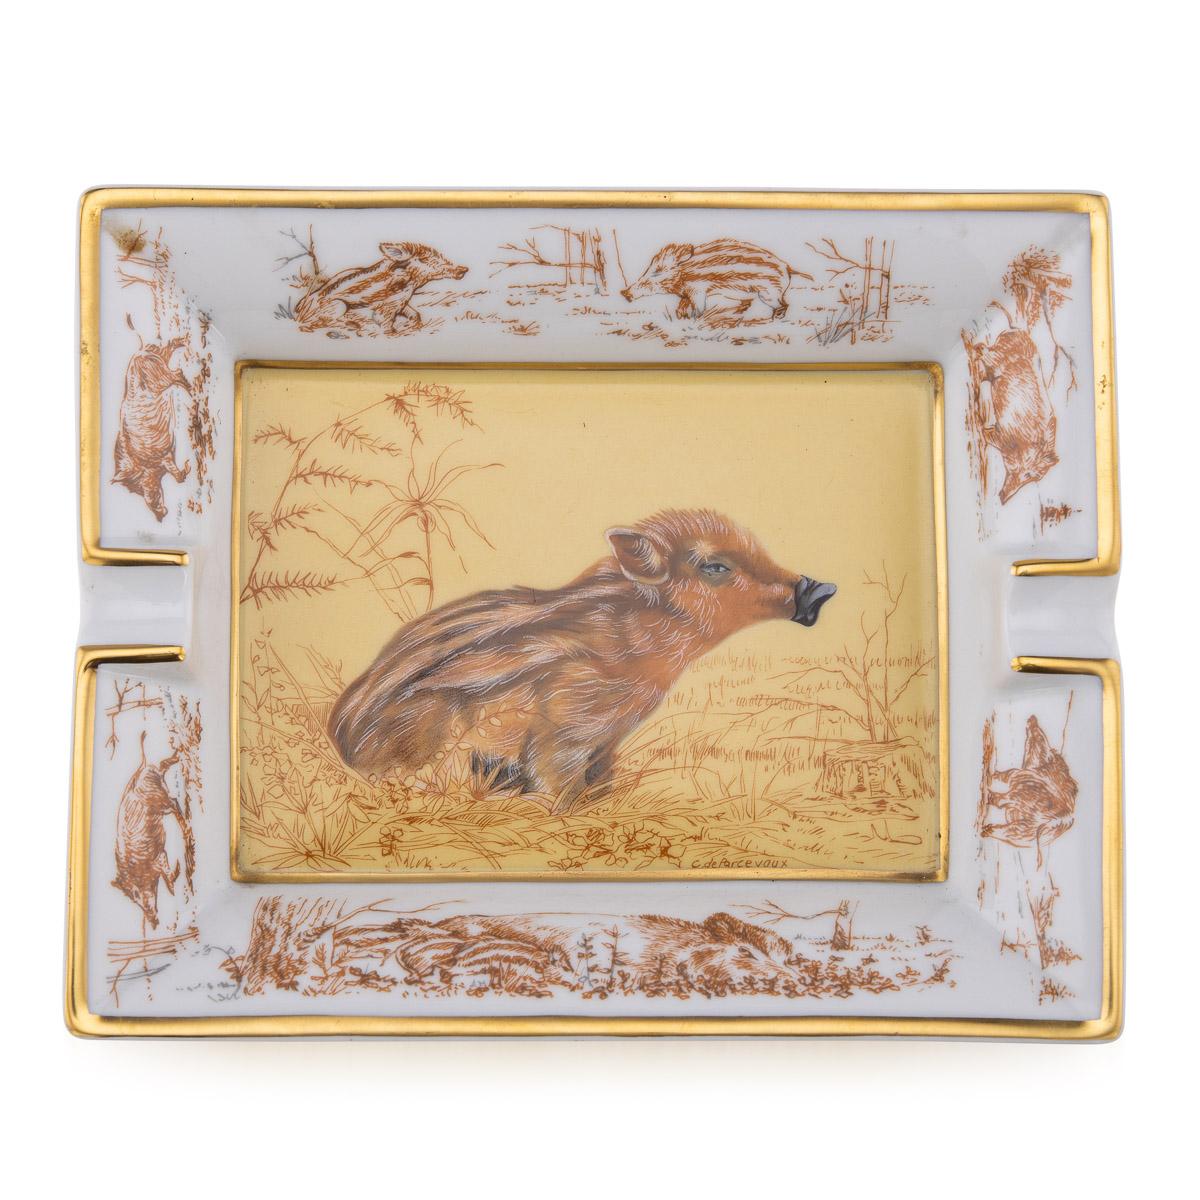 A ceramic ashtray by Hermes, made in France in the latter half of the 20th century. These ashtrays have always been very collectable with the vintage models in particular. This one has a lovely wild boar theme but at the same time typically Hermes;